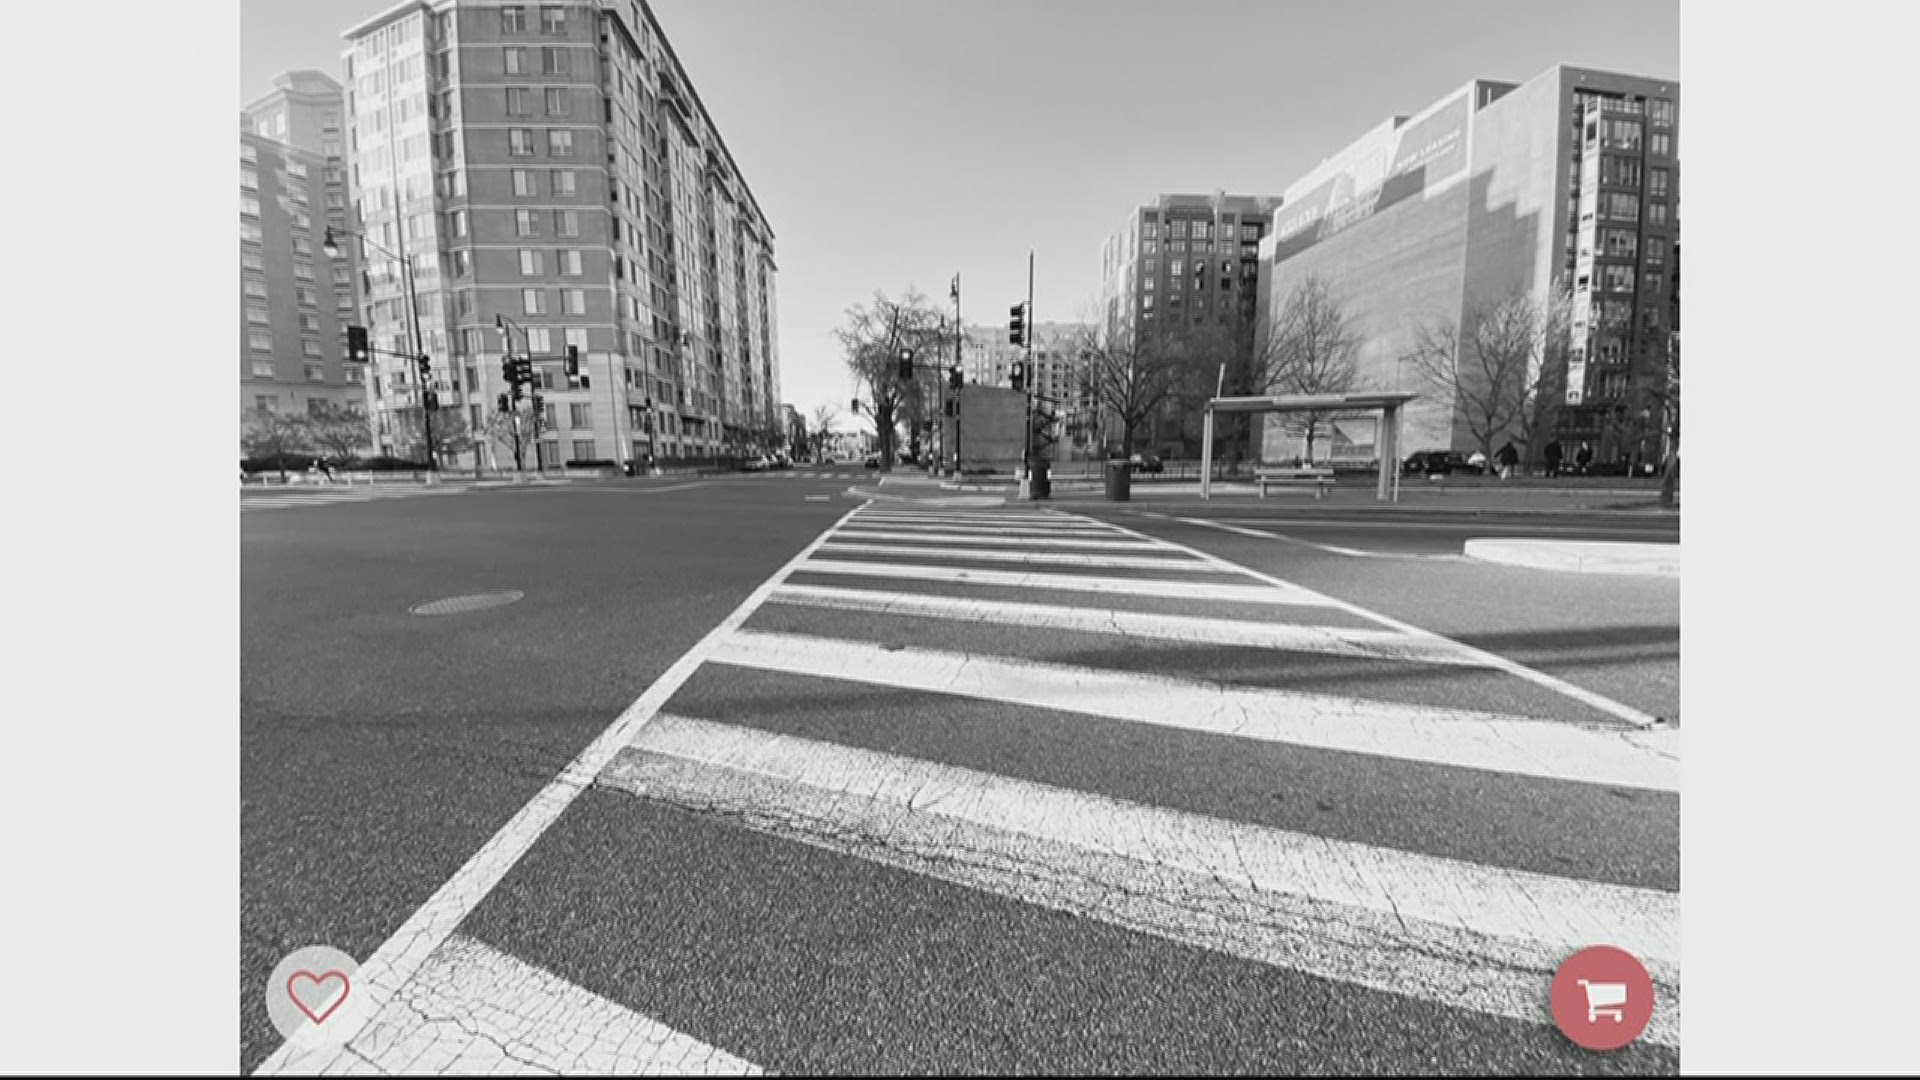 A photographer captured the once-bustling streets of D.C. and its emptiness during the coronavirus.